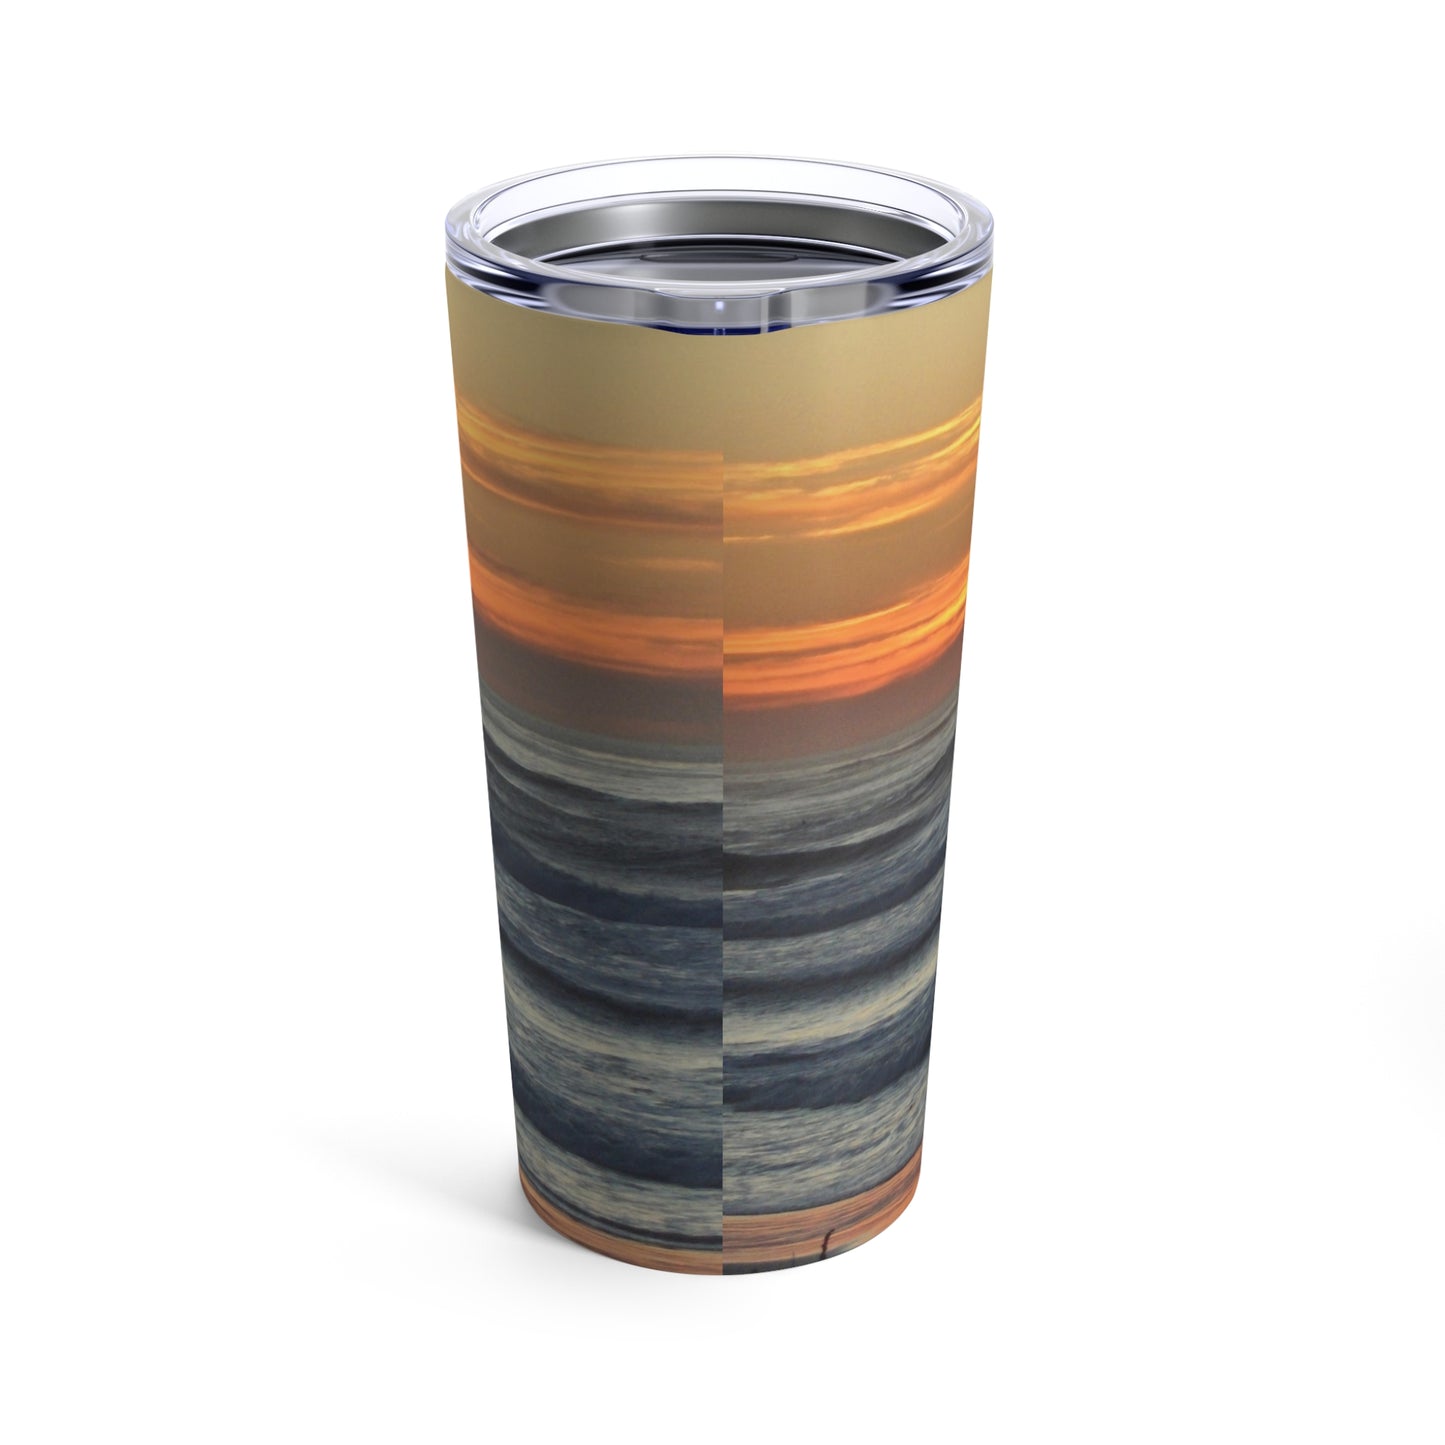 An insulated Sunset Seascape Tumbler with an image of the ocean at sunset, crafted from stainless steel. Made by Printify.